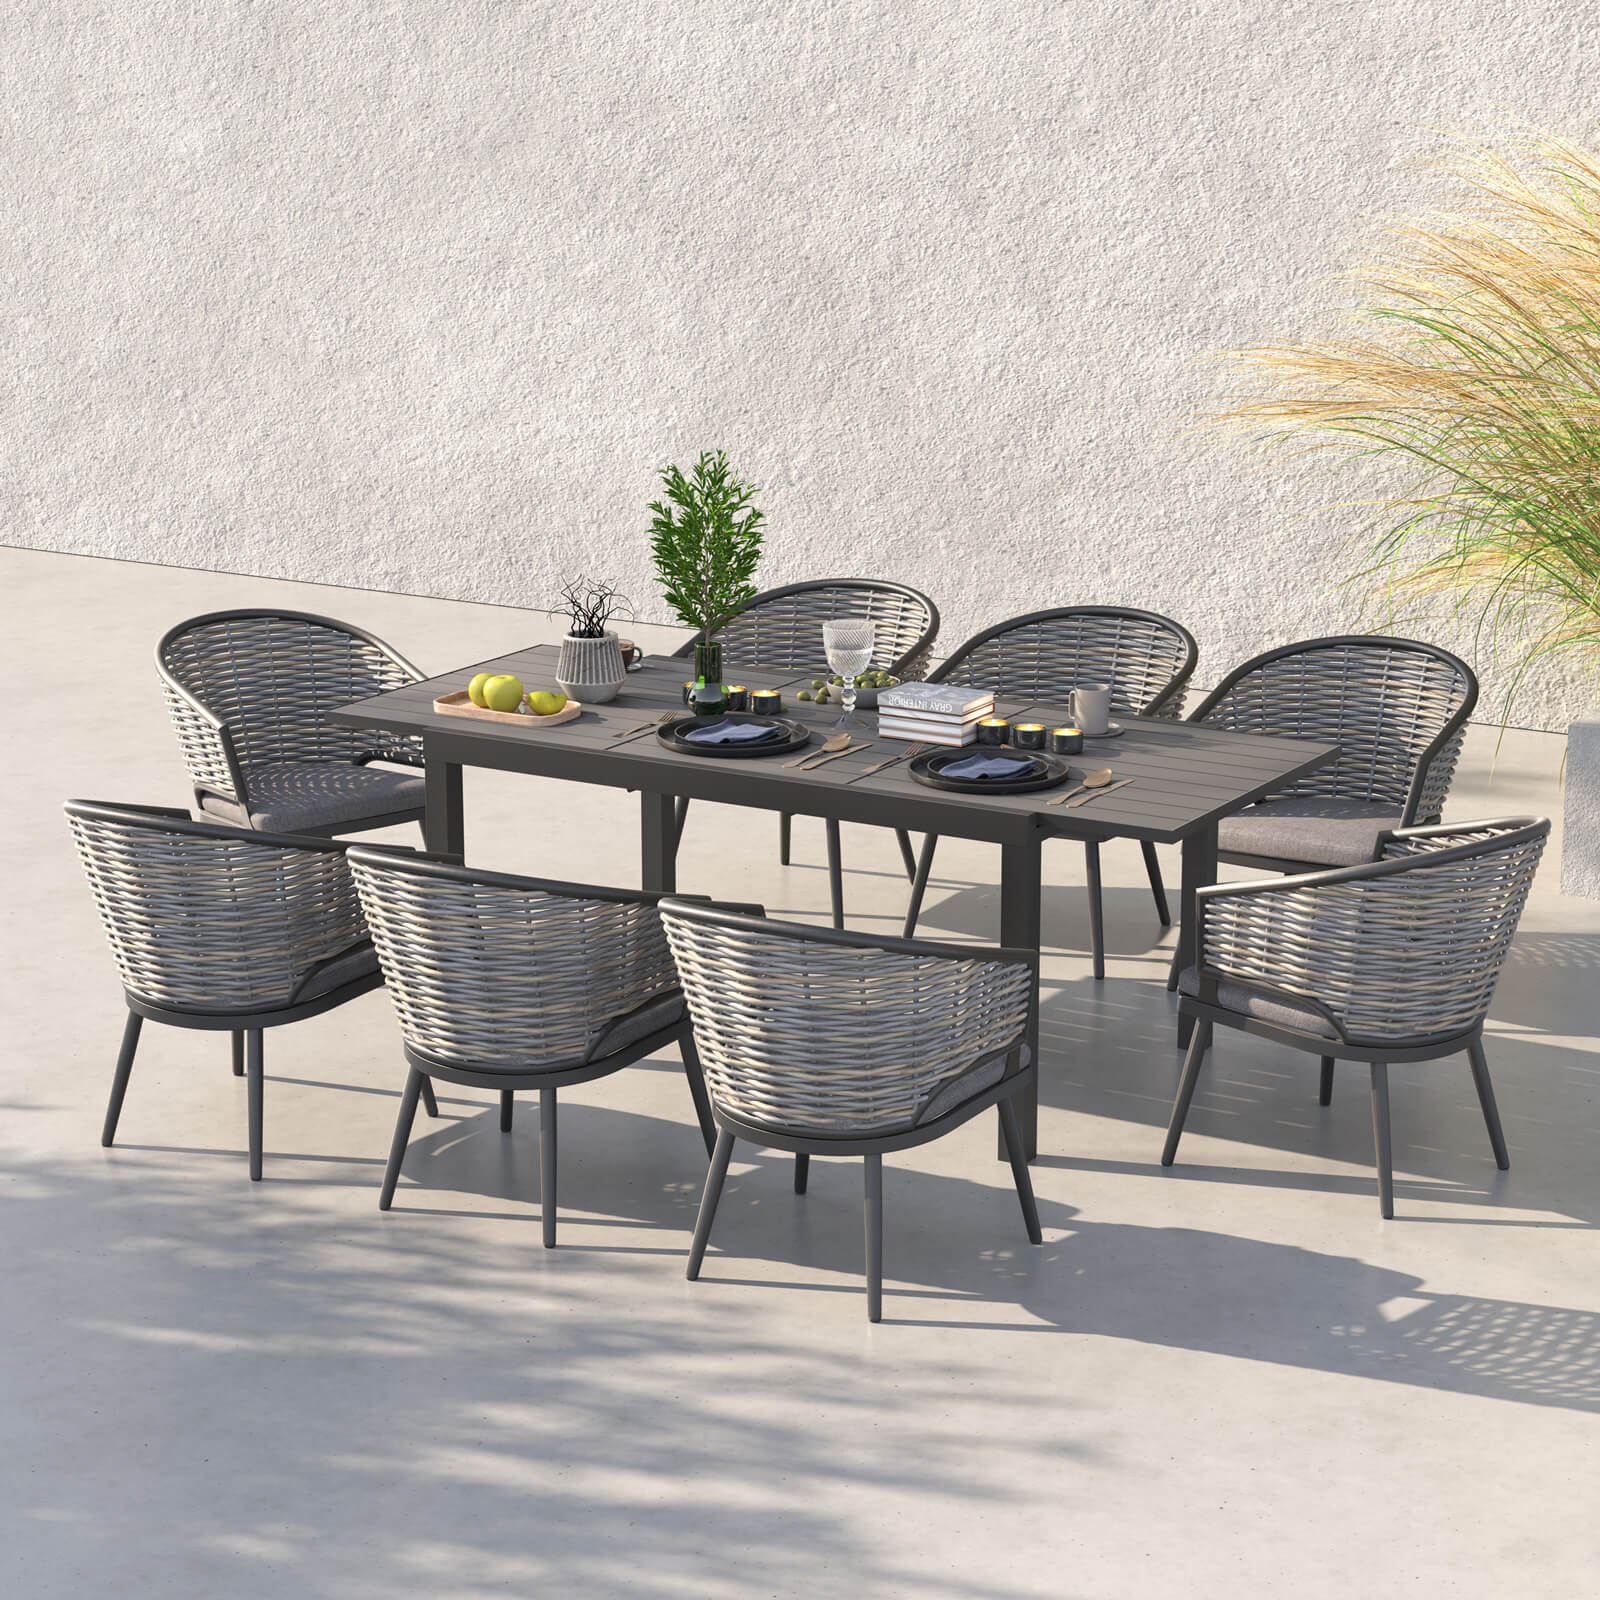 Burano Grey wicker outdoor Dining Set with aluminum frame, 8 chairs with grey cushions, 1 aluminum extendable rectangle dining Table, in the yard- Jardina Furniture#Piece_9-pc.